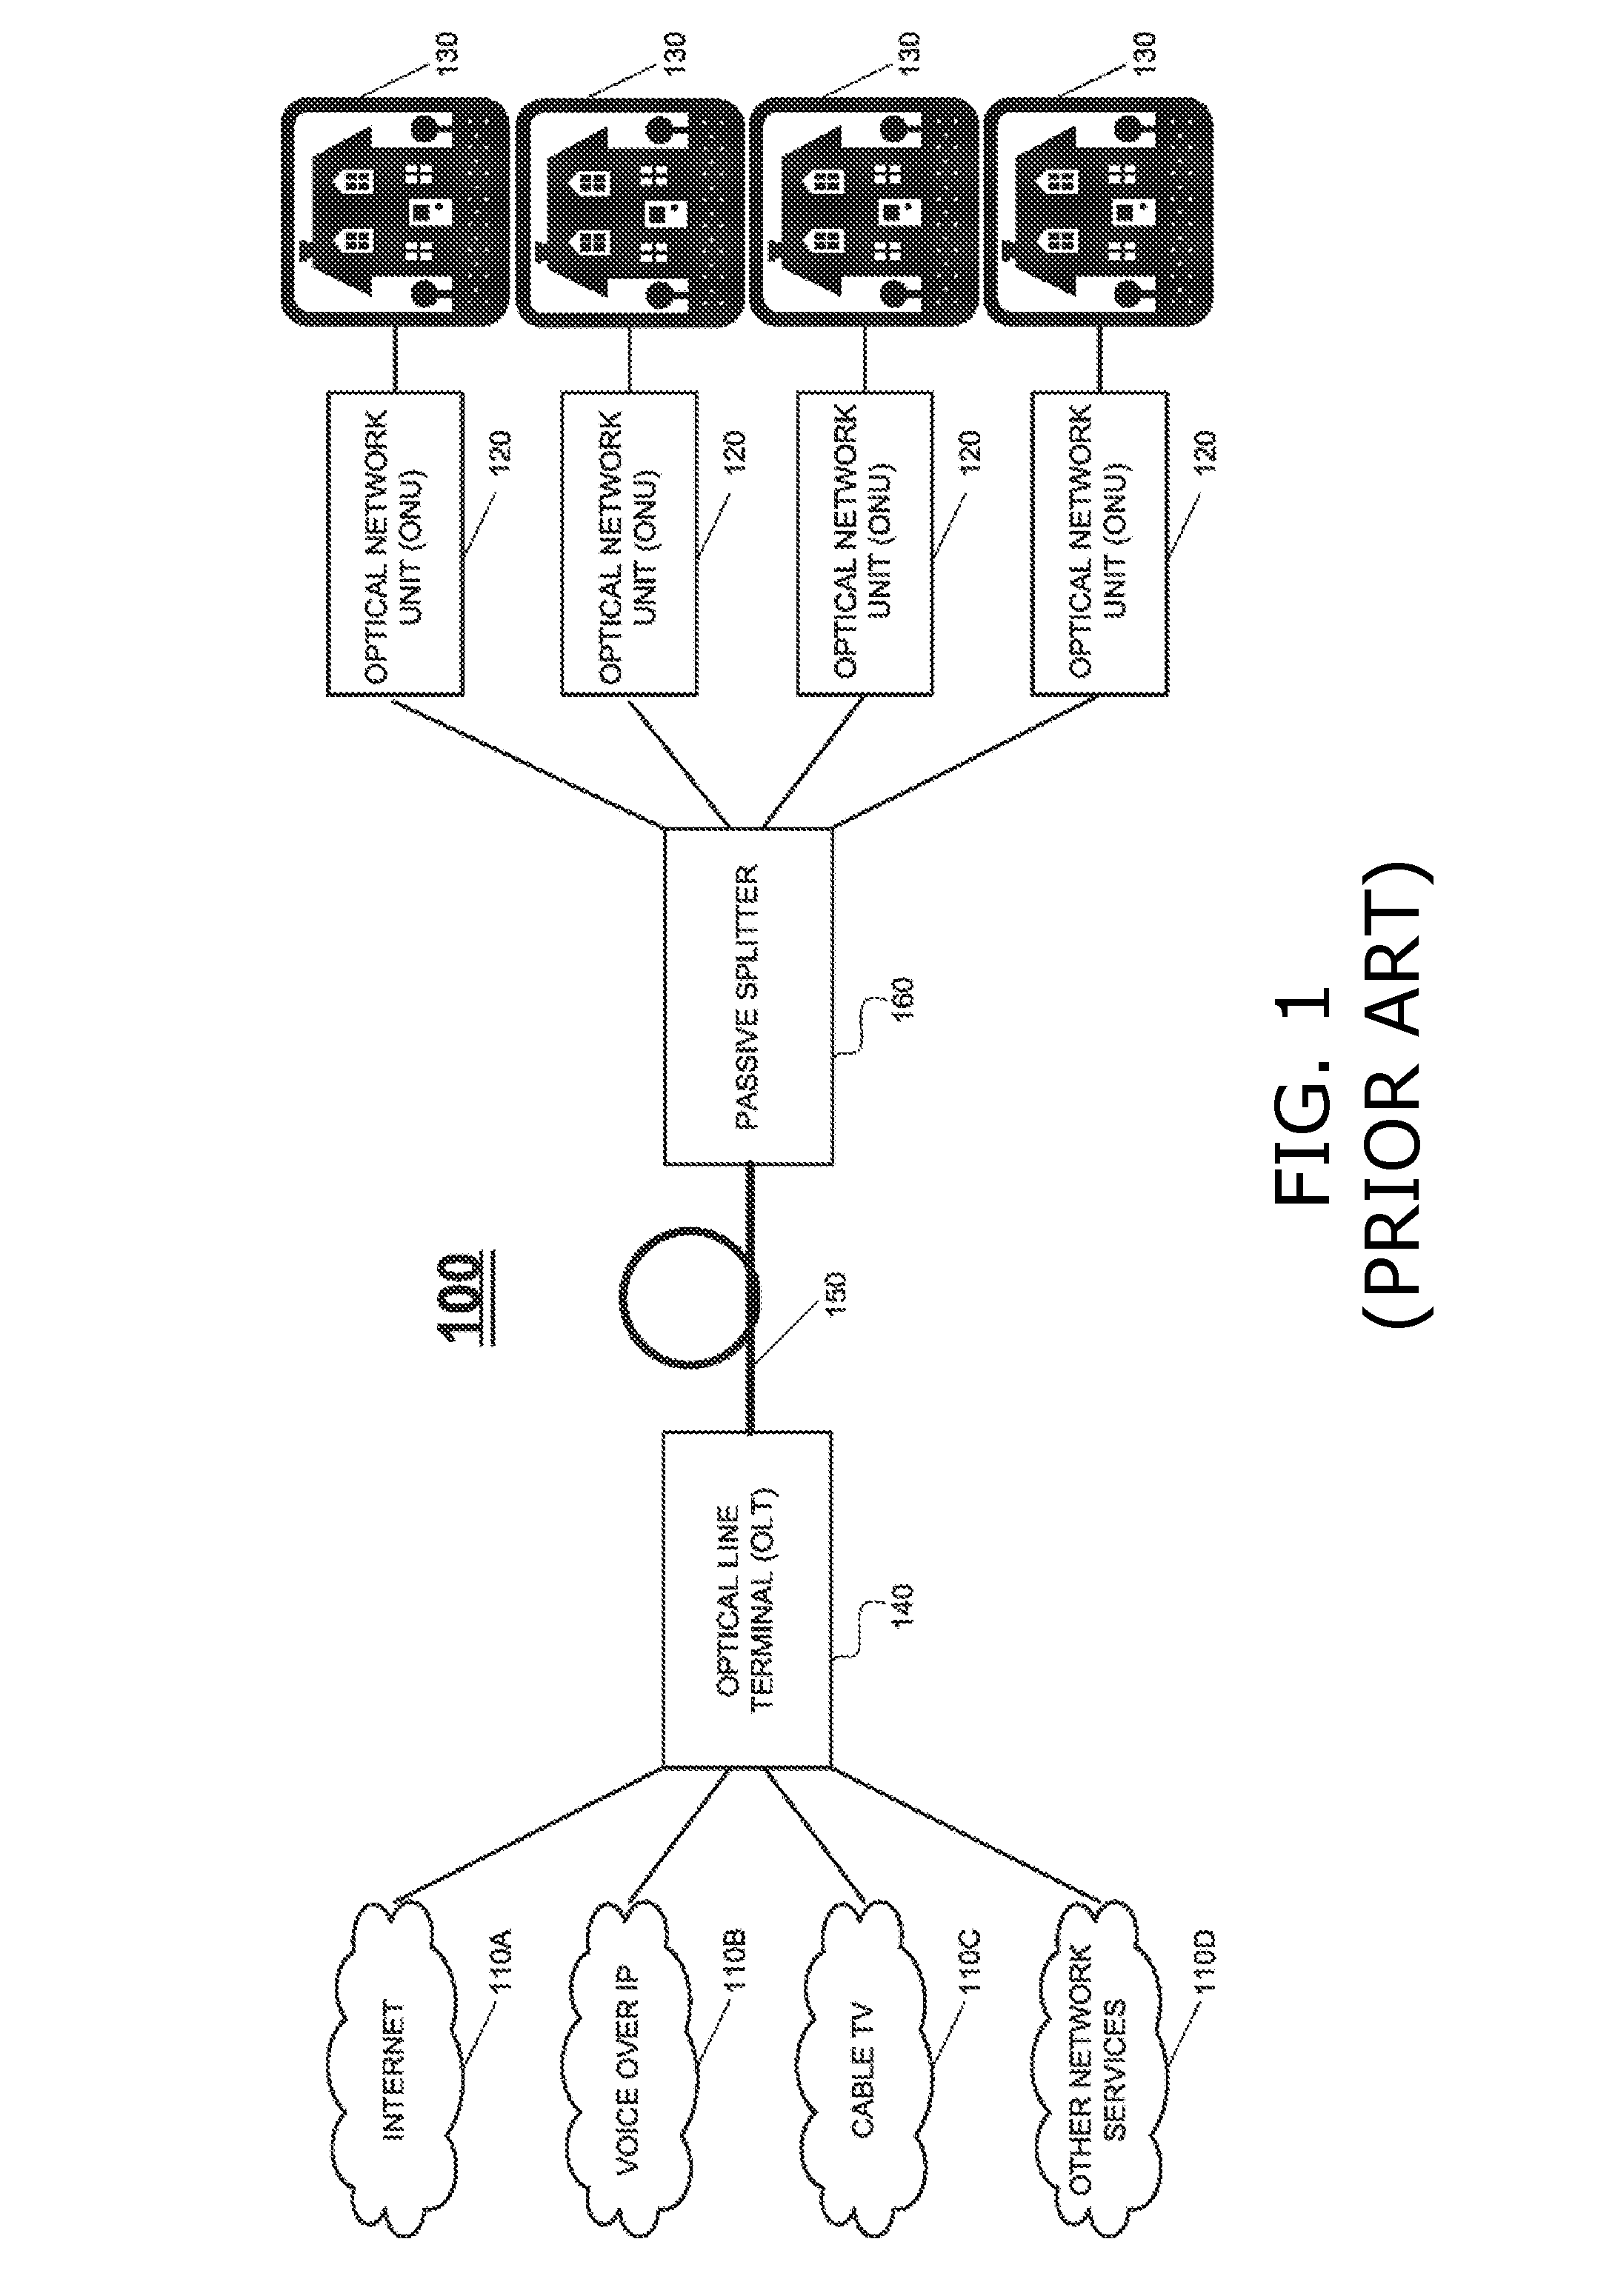 Dynamic bandwidth allocation for upstream transmission in passive optical networks